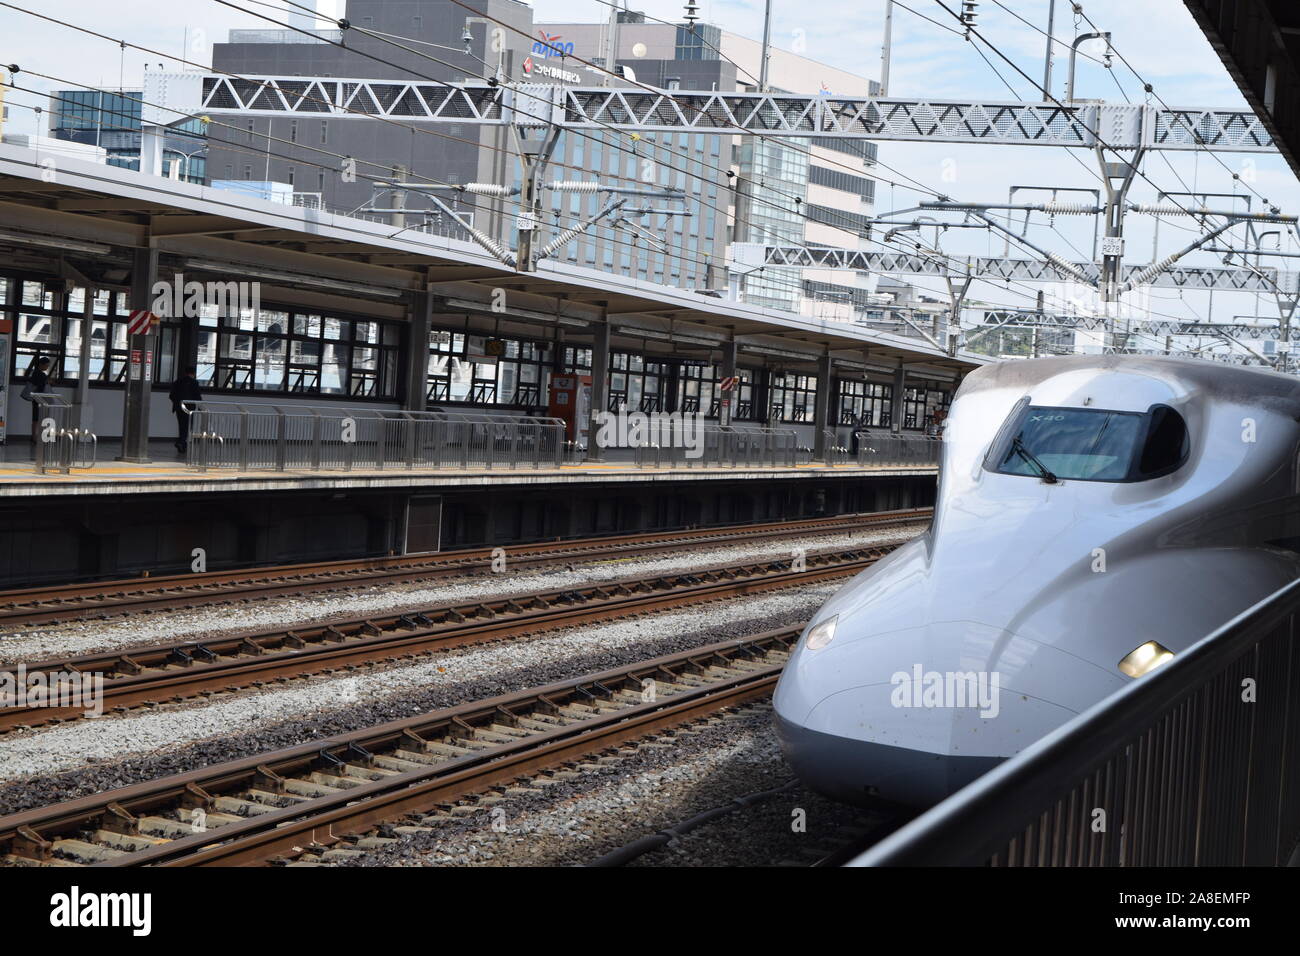 View of a Bullet Train in a train station in Japan Stock Photo